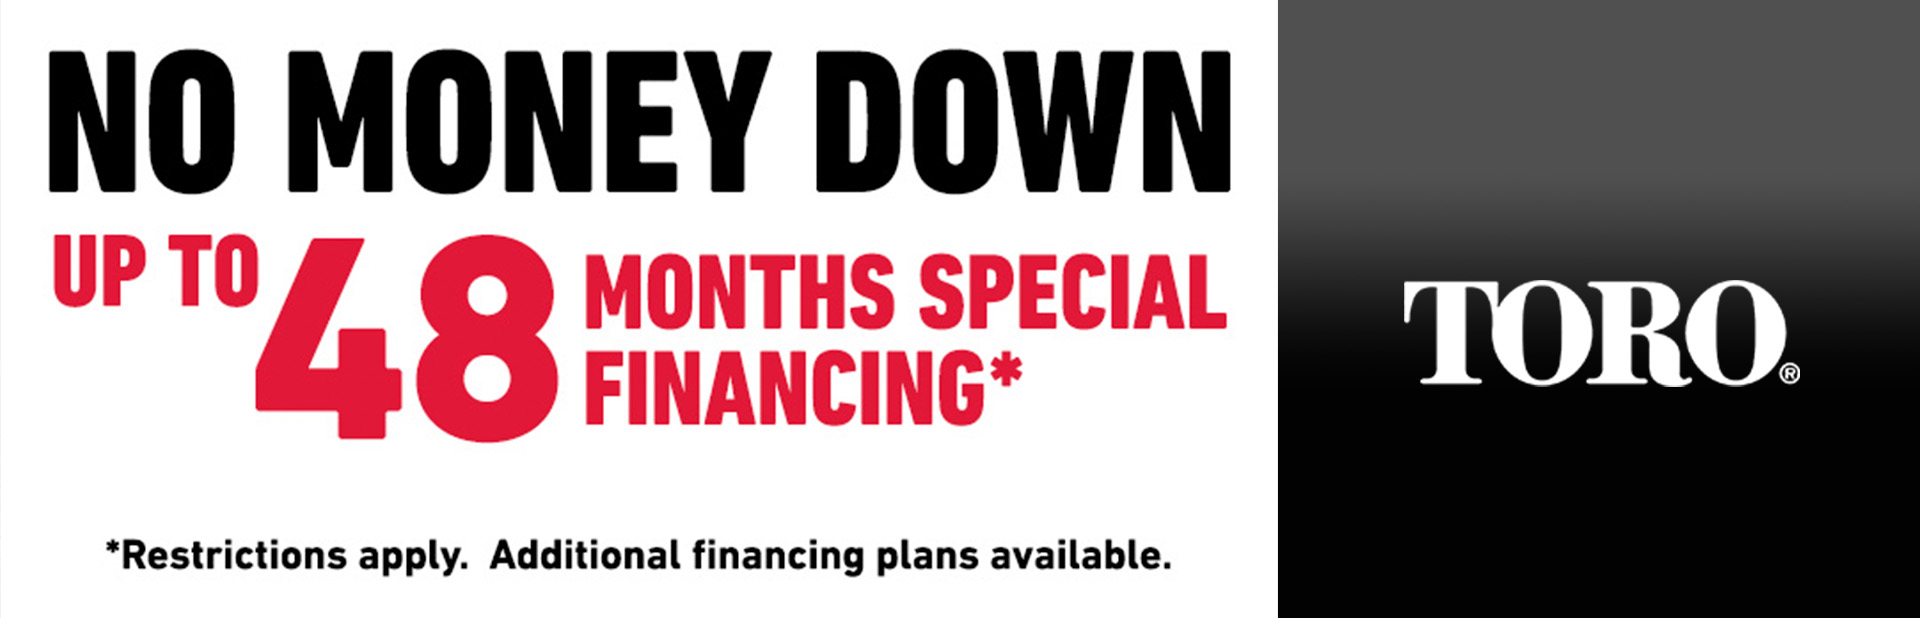 NO MONEY DOWN UP TO 48 MONTHS SPECIAL FINANCING*